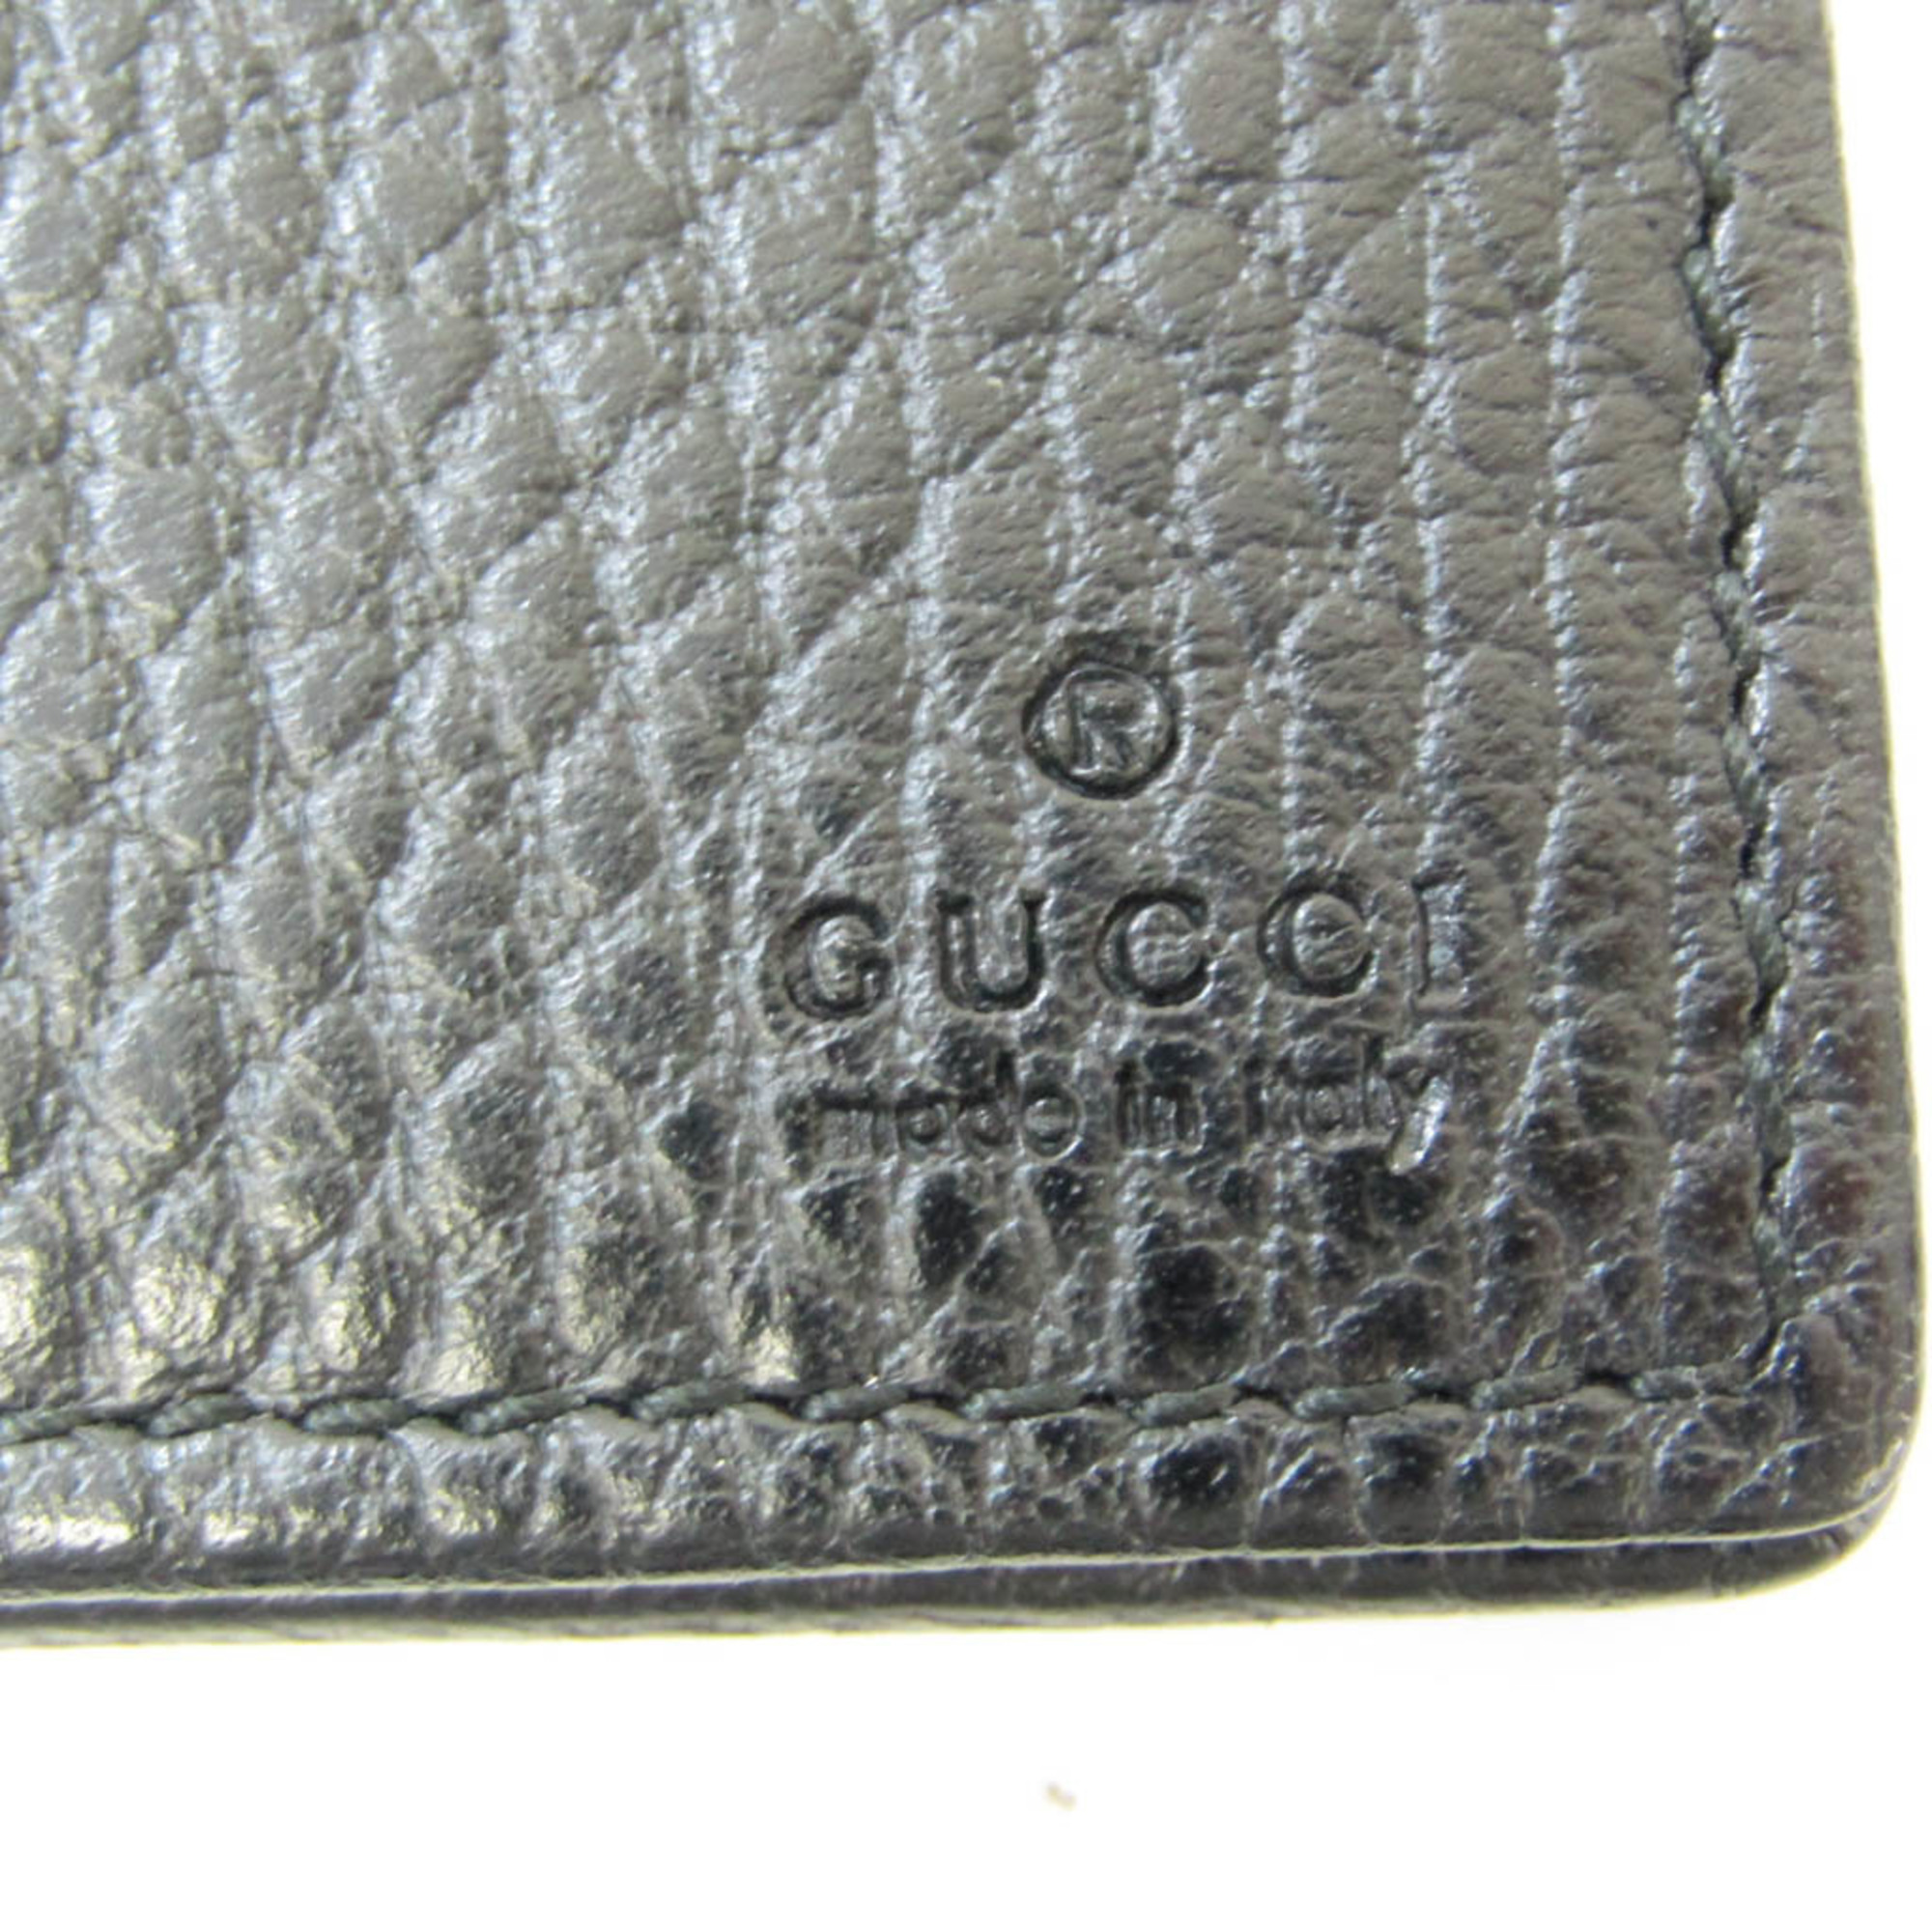 Gucci Gucci Swing 368231 Women's Leather Chain/Shoulder Wallet Black